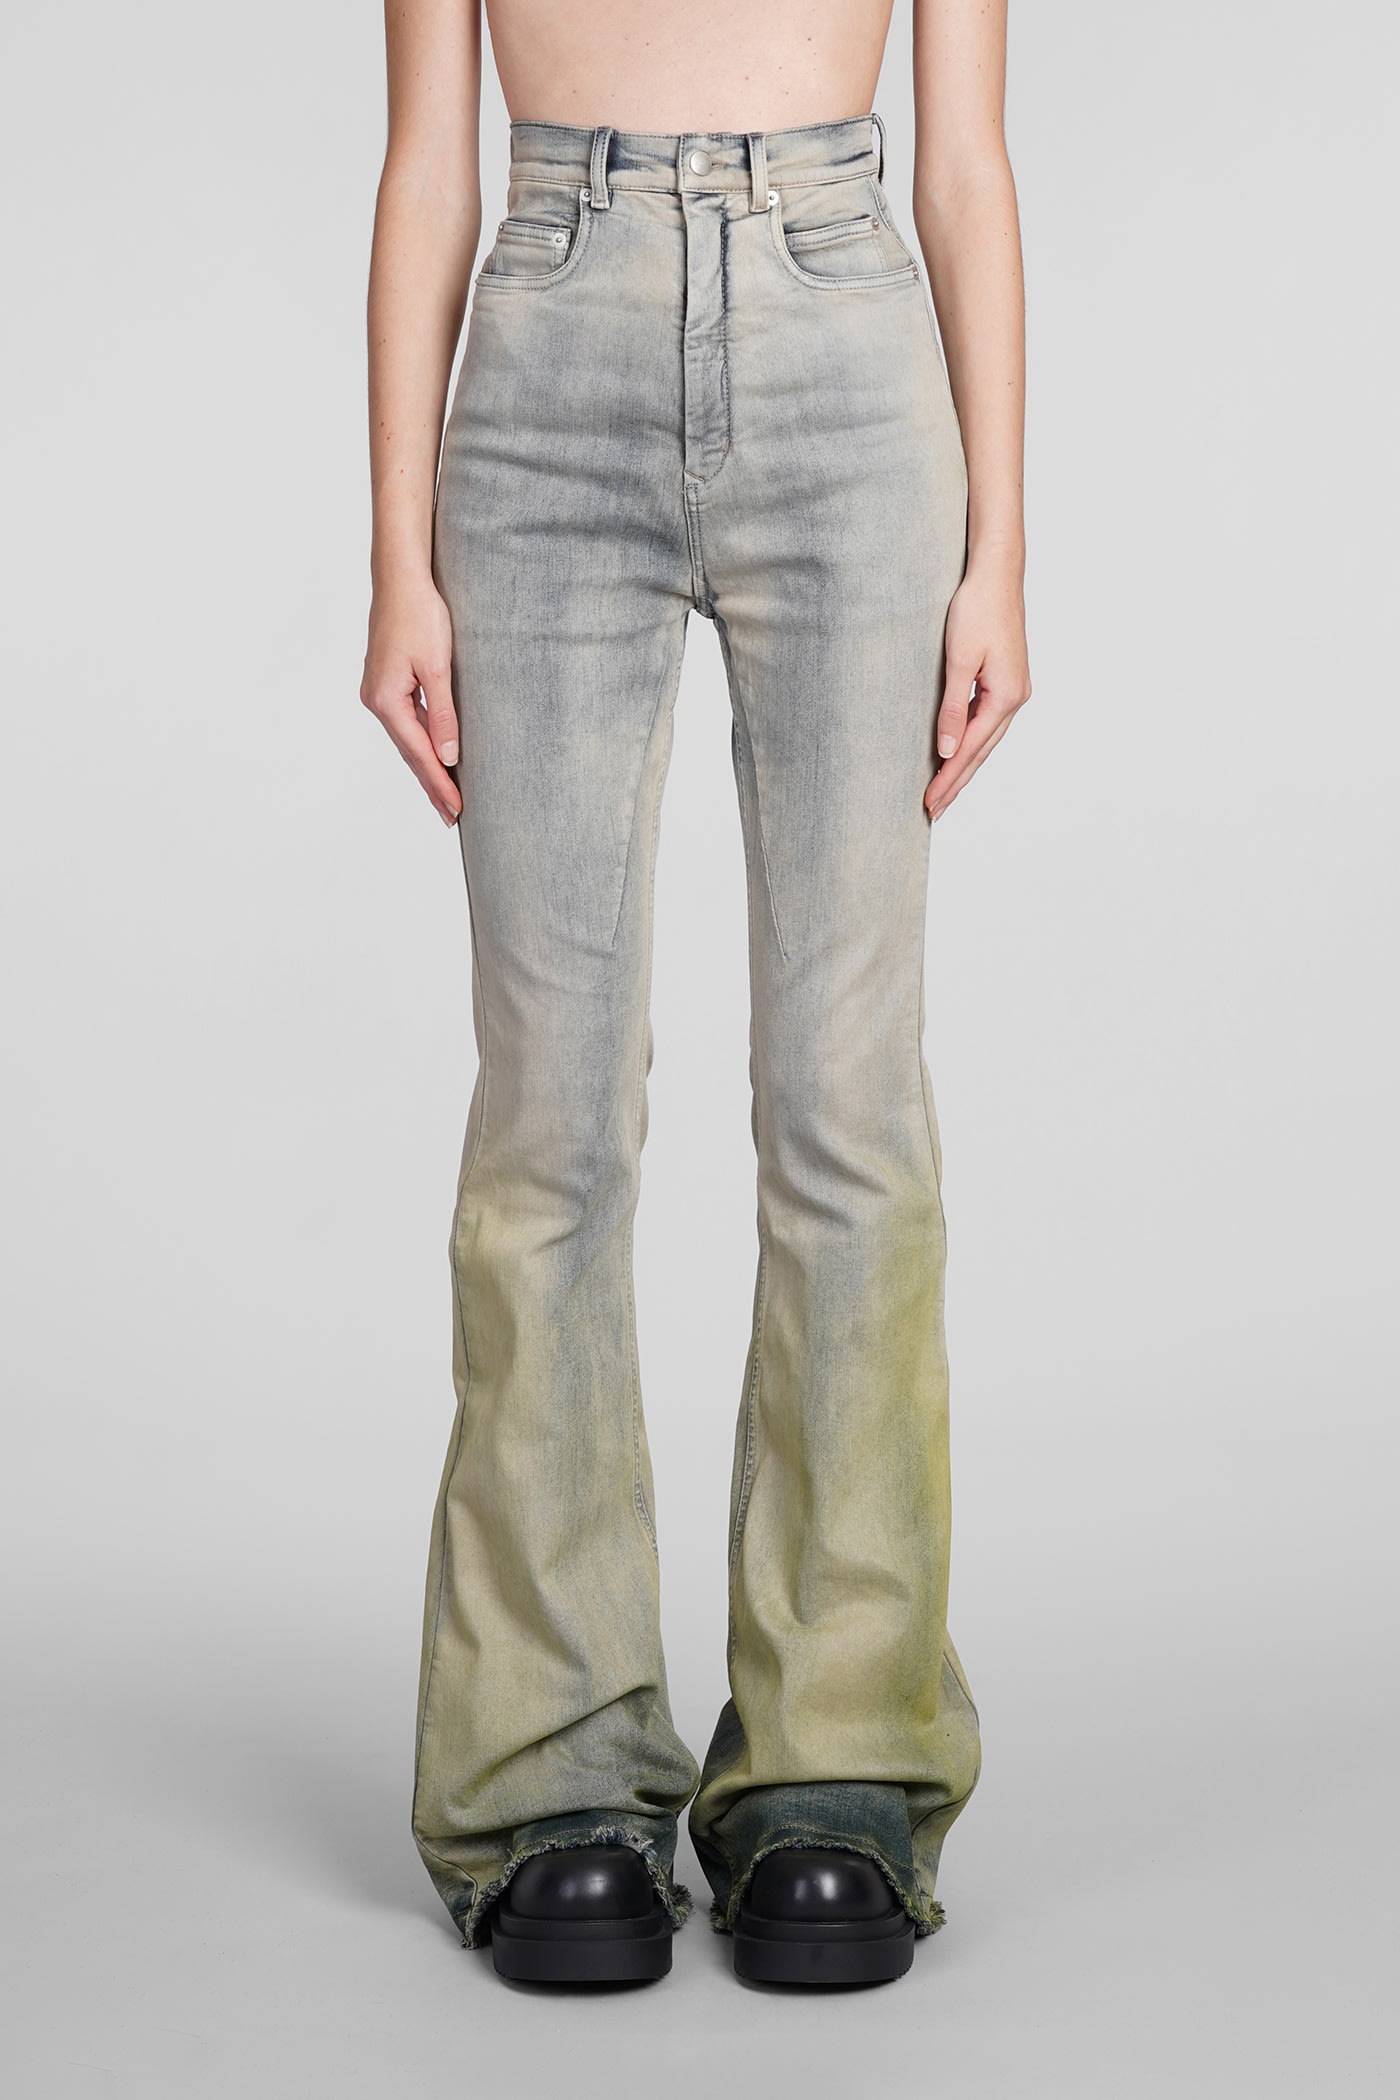 RICK OWENS BOLAN BOOTCUT JEANS IN BEIGE COTTON